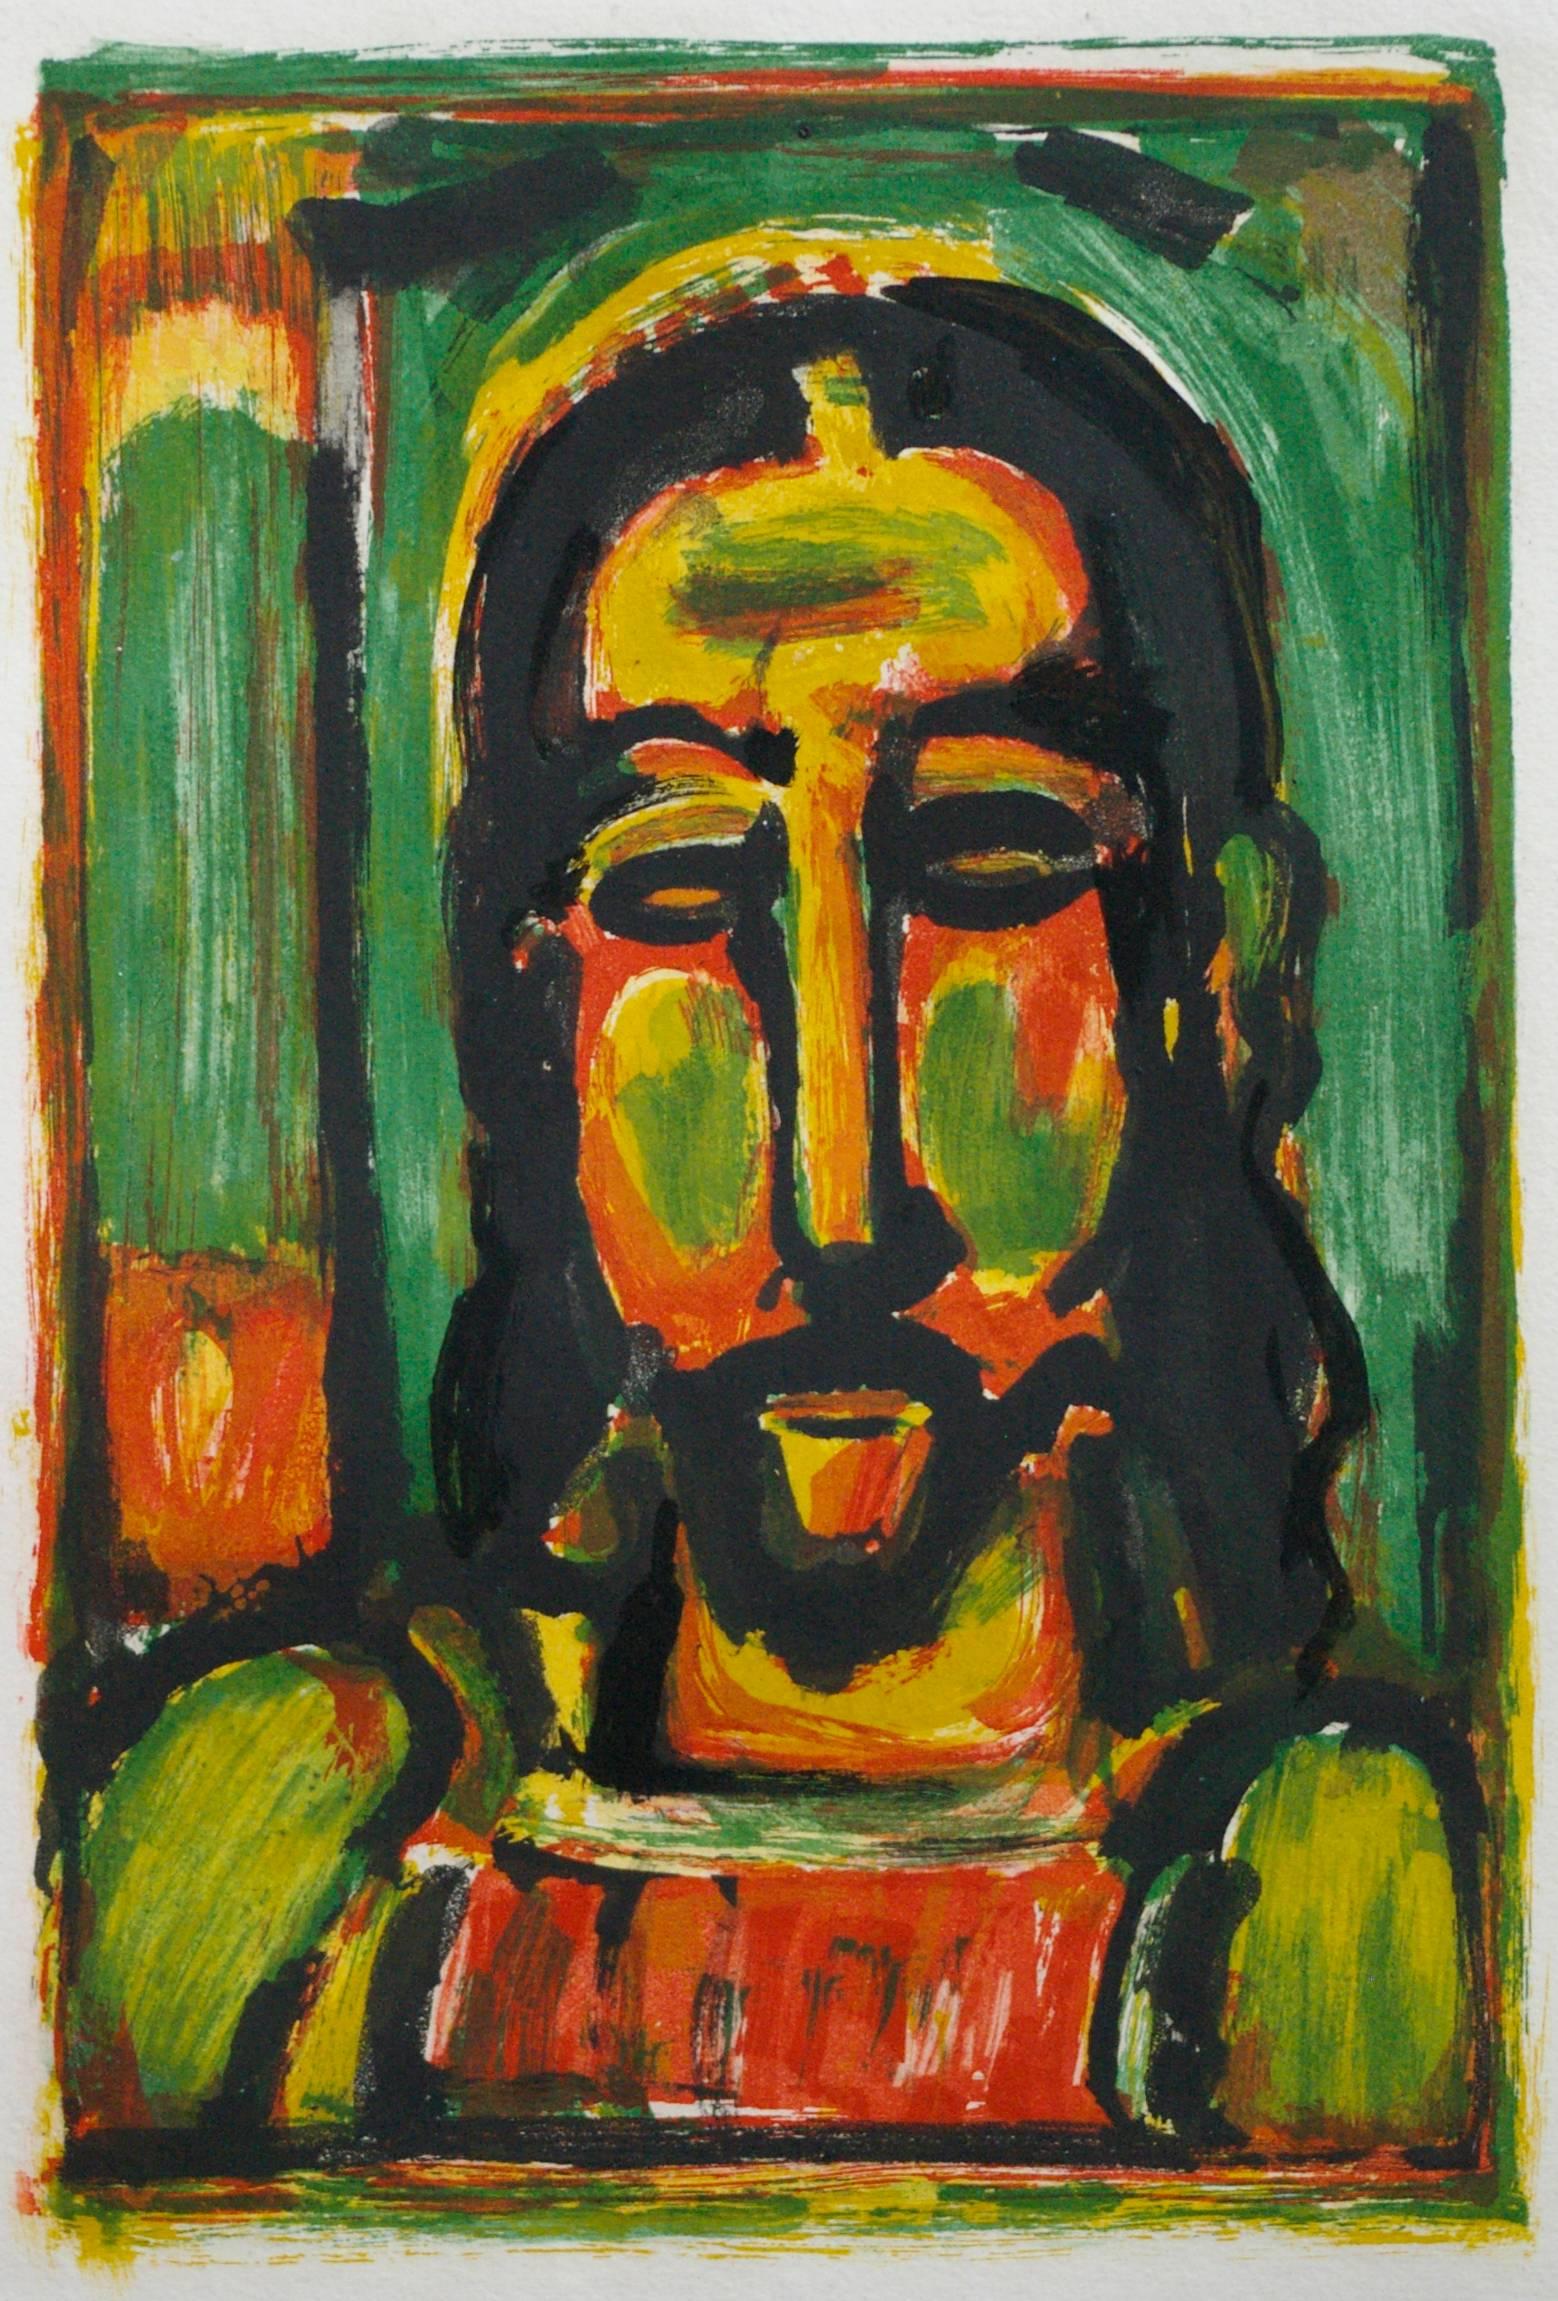 Passion - Brown Figurative Print by Georges Rouault